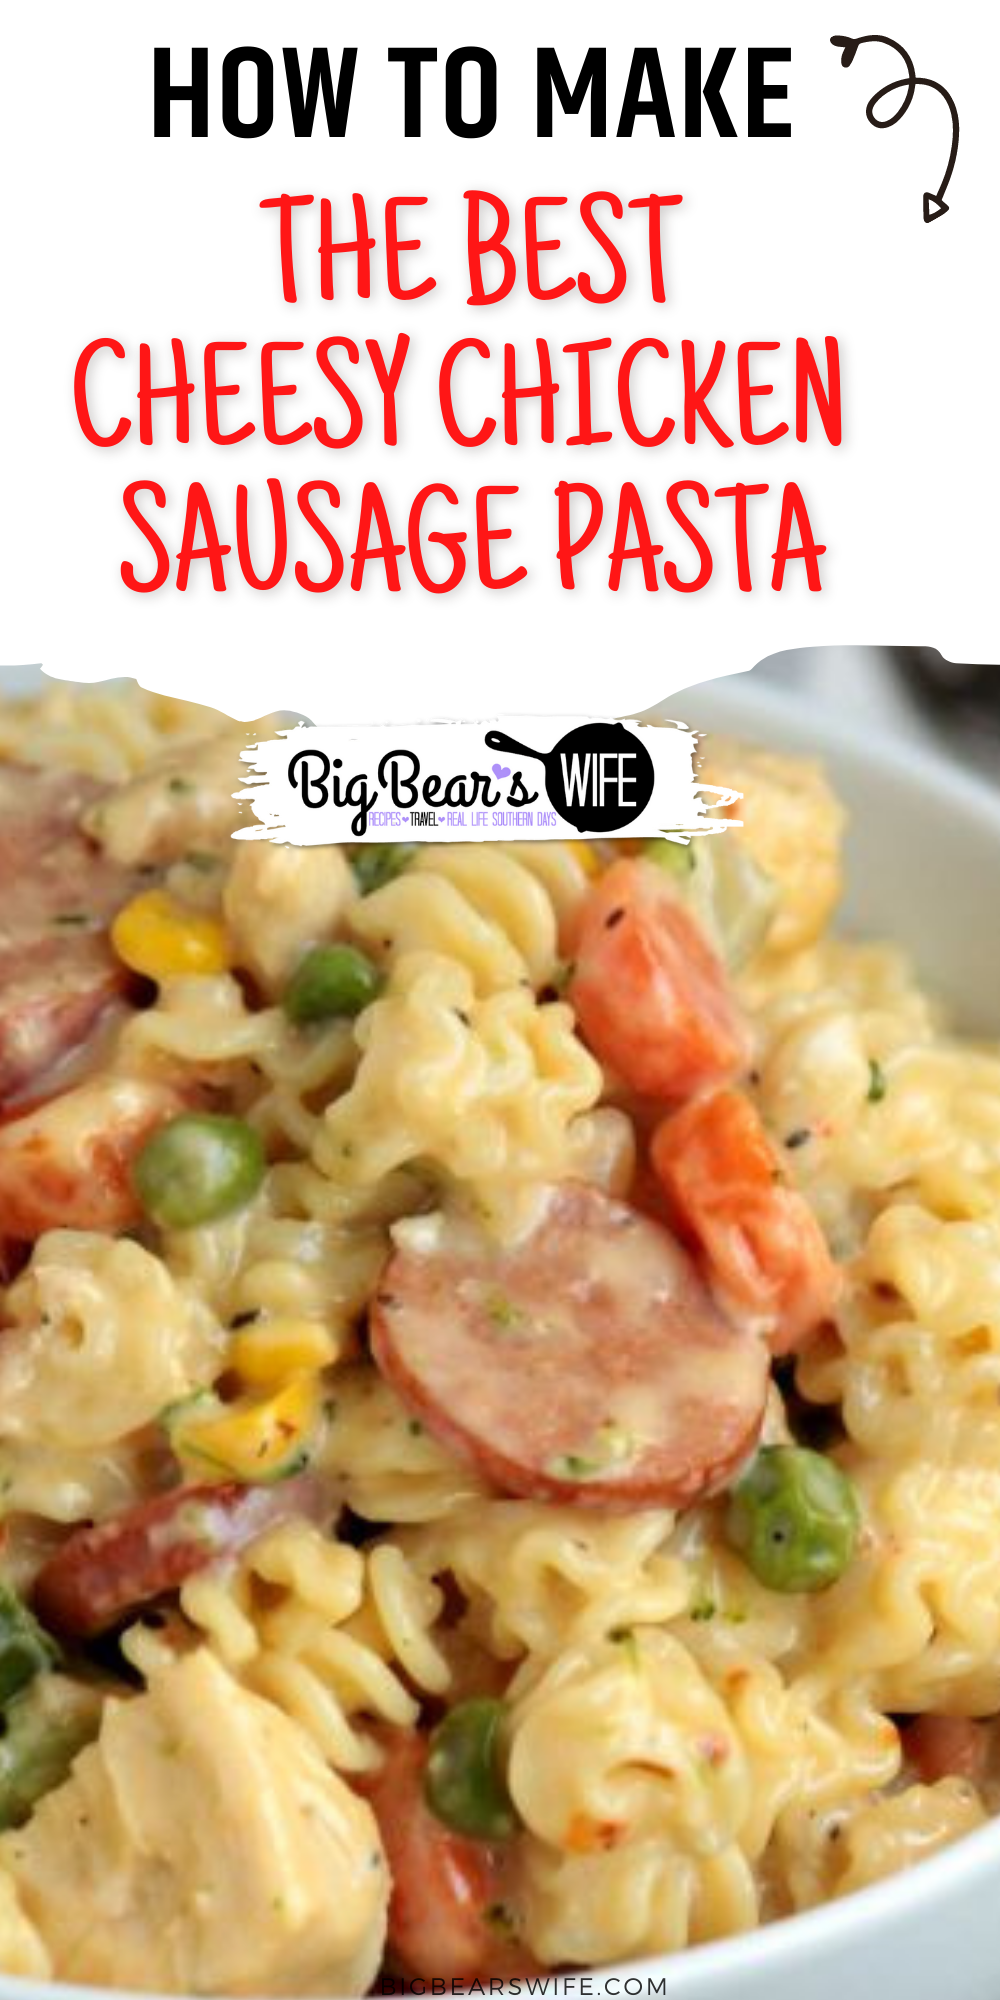  Cheesy Chicken & Sausage Pasta – This Cheesy Chicken & Sausage Pasta is a copycat homemade version of the frozen bags of cheesy chicken pasta that comes from the grocery store! via @bigbearswife